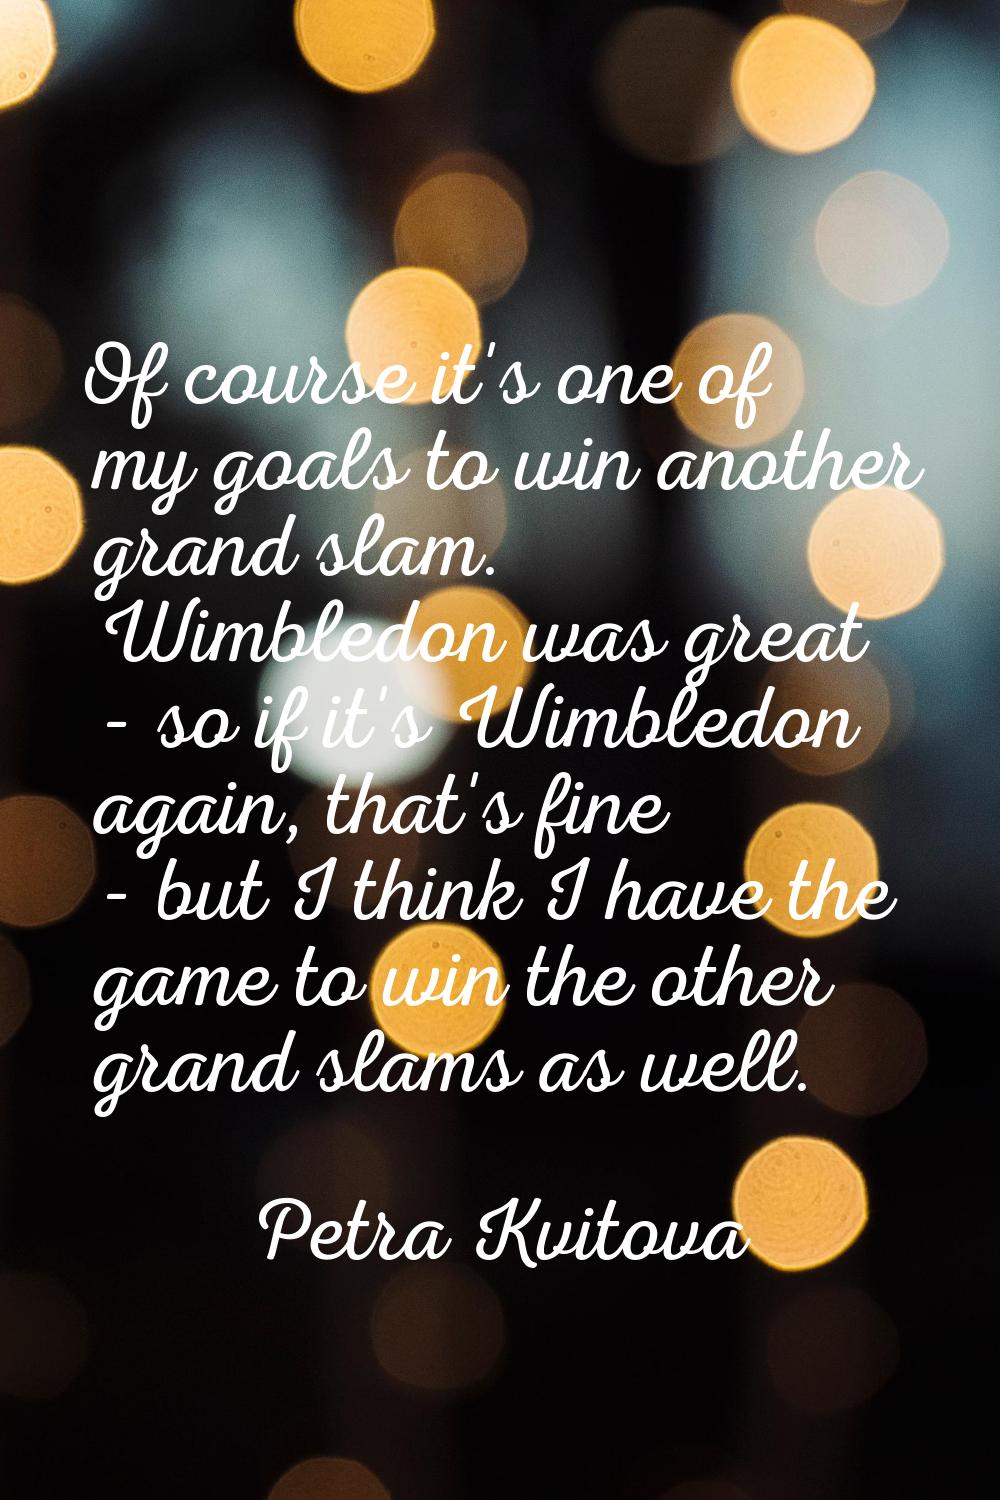 Of course it's one of my goals to win another grand slam. Wimbledon was great - so if it's Wimbledo